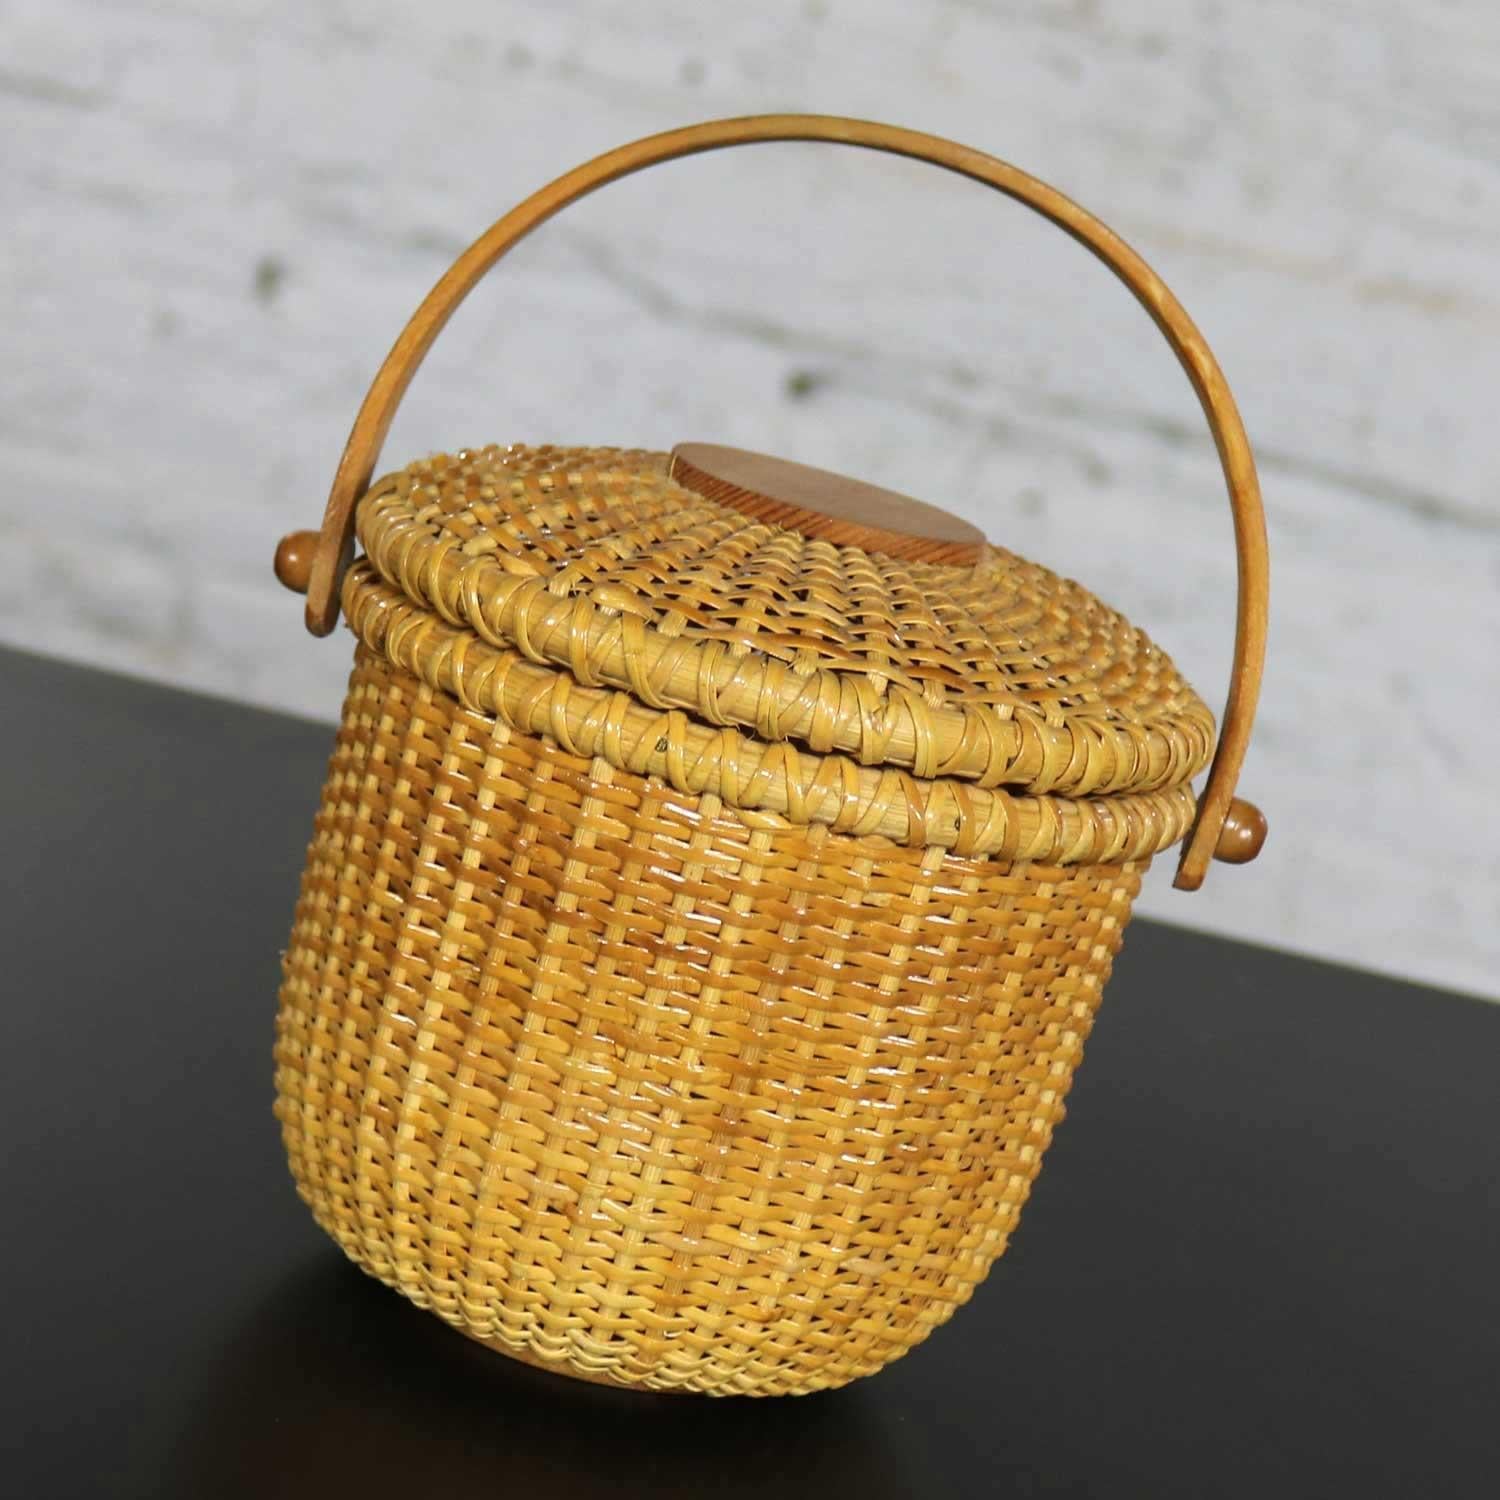 Lovely Nantucket lightship friendship basket round and lidded. It is in fabulous vintage condition with no outstanding flaws we have detected. Please see photos, circa late 20th century.

This beautiful basket is a wonderful example of the